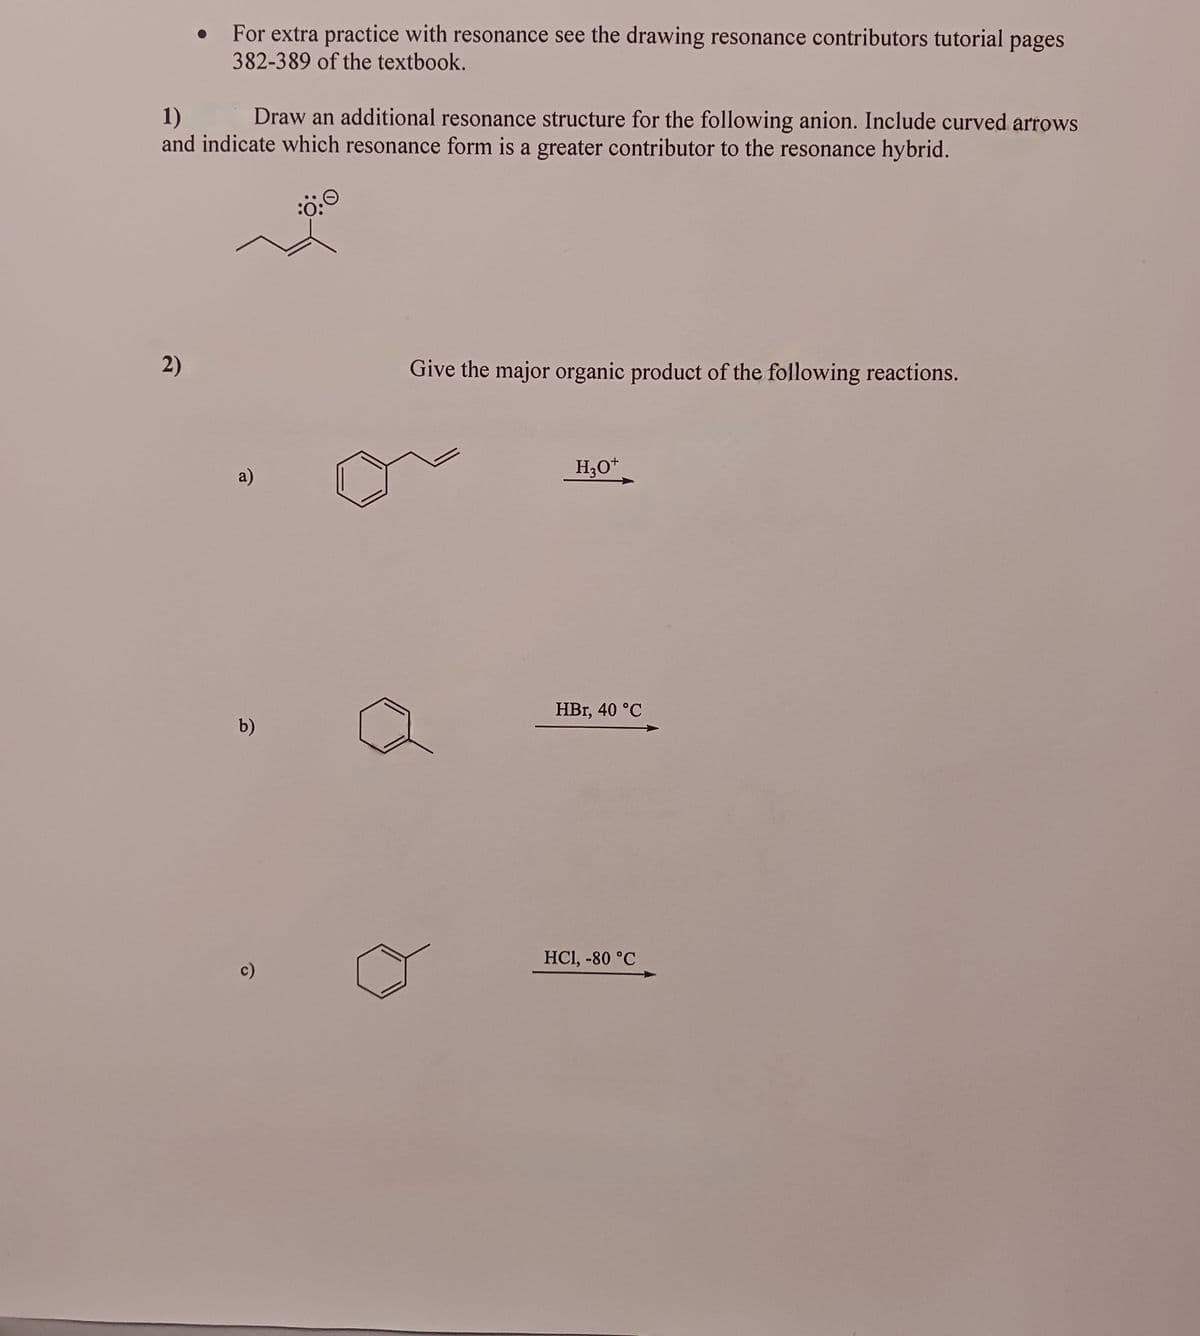 For extra practice with resonance see the drawing resonance contributors tutorial pages
382-389 of the textbook.
1)
Draw an additional resonance structure for the following anion. Include curved arrows
and indicate which resonance form is a greater contributor to the resonance hybrid.
2)
a)
b)
c)
Give the major organic product of the following reactions.
H3O+
HBr, 40 °C
HC1, -80 °C